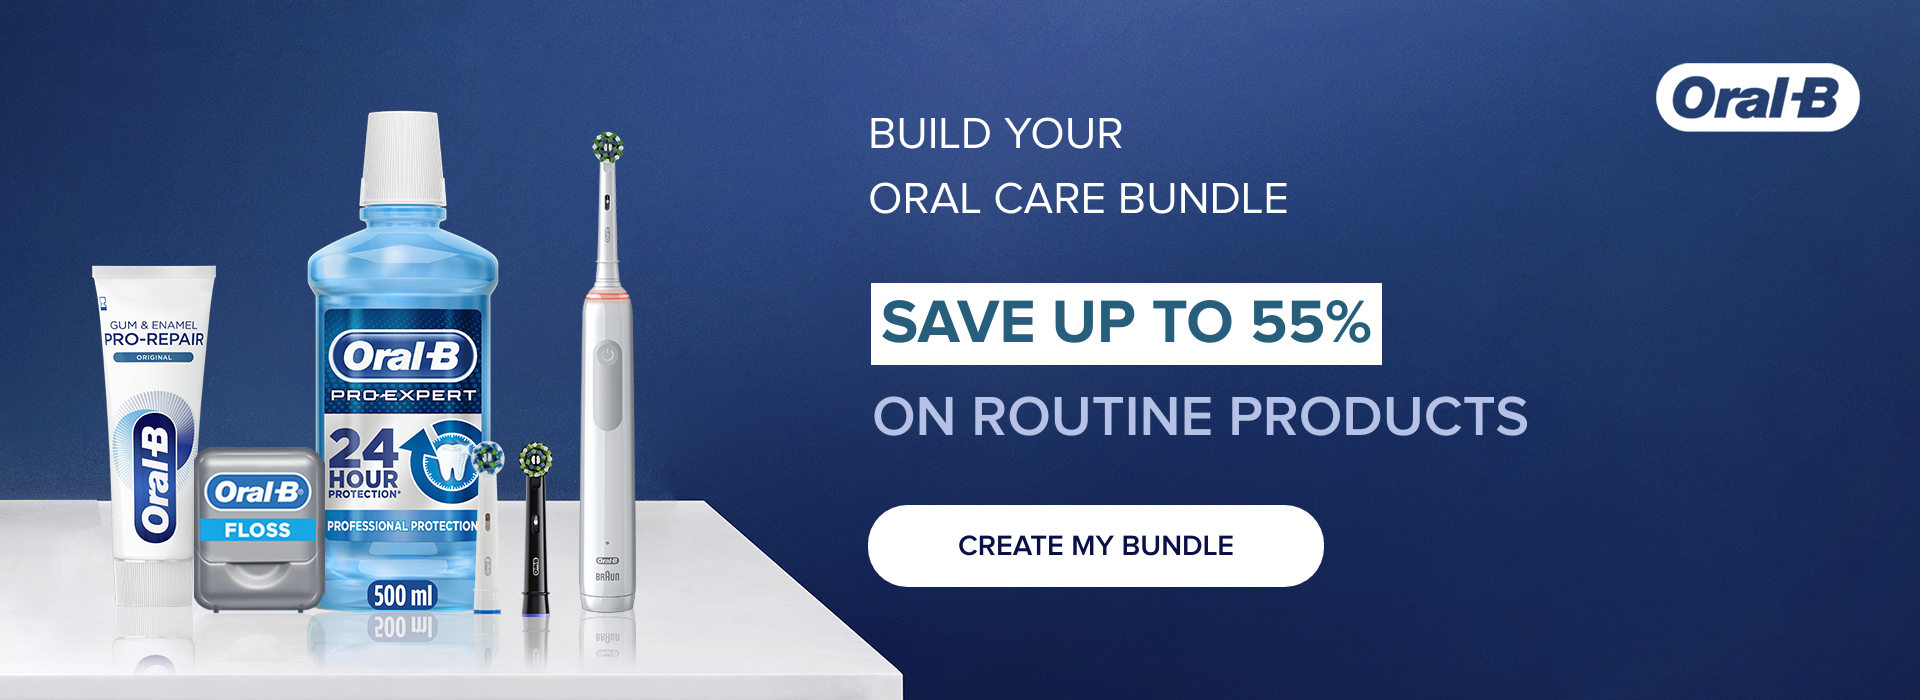 Build your oral care bundle. Save up to 55% on rountine products. Create my bundle.